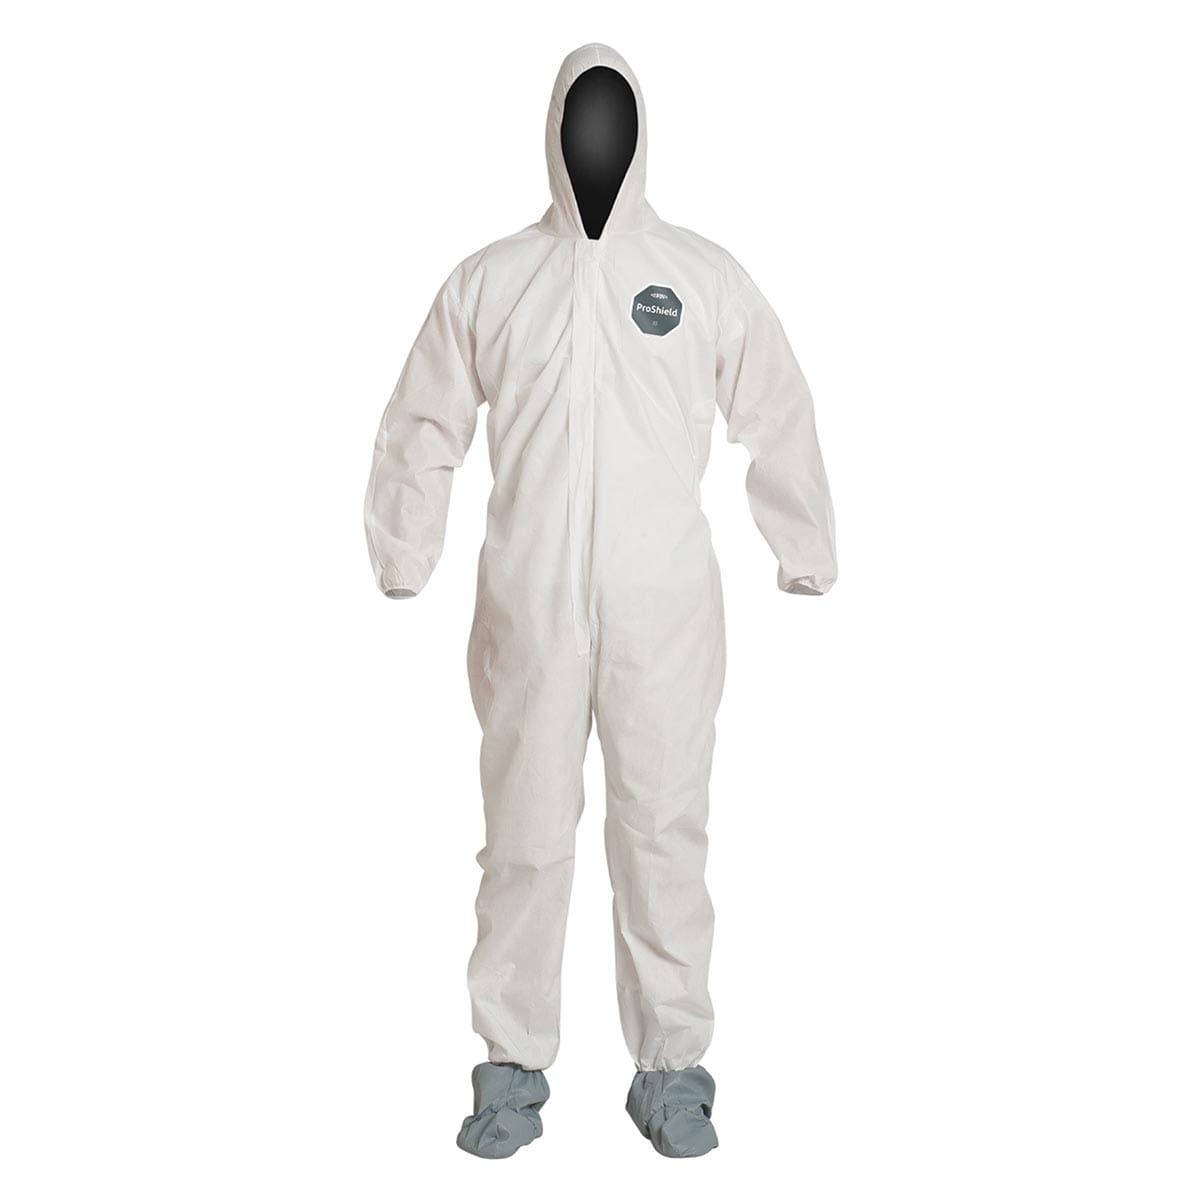 DuPont ProShield 10 Coveralls with Hood, Booties, and Serged Seams  |  25 Pack